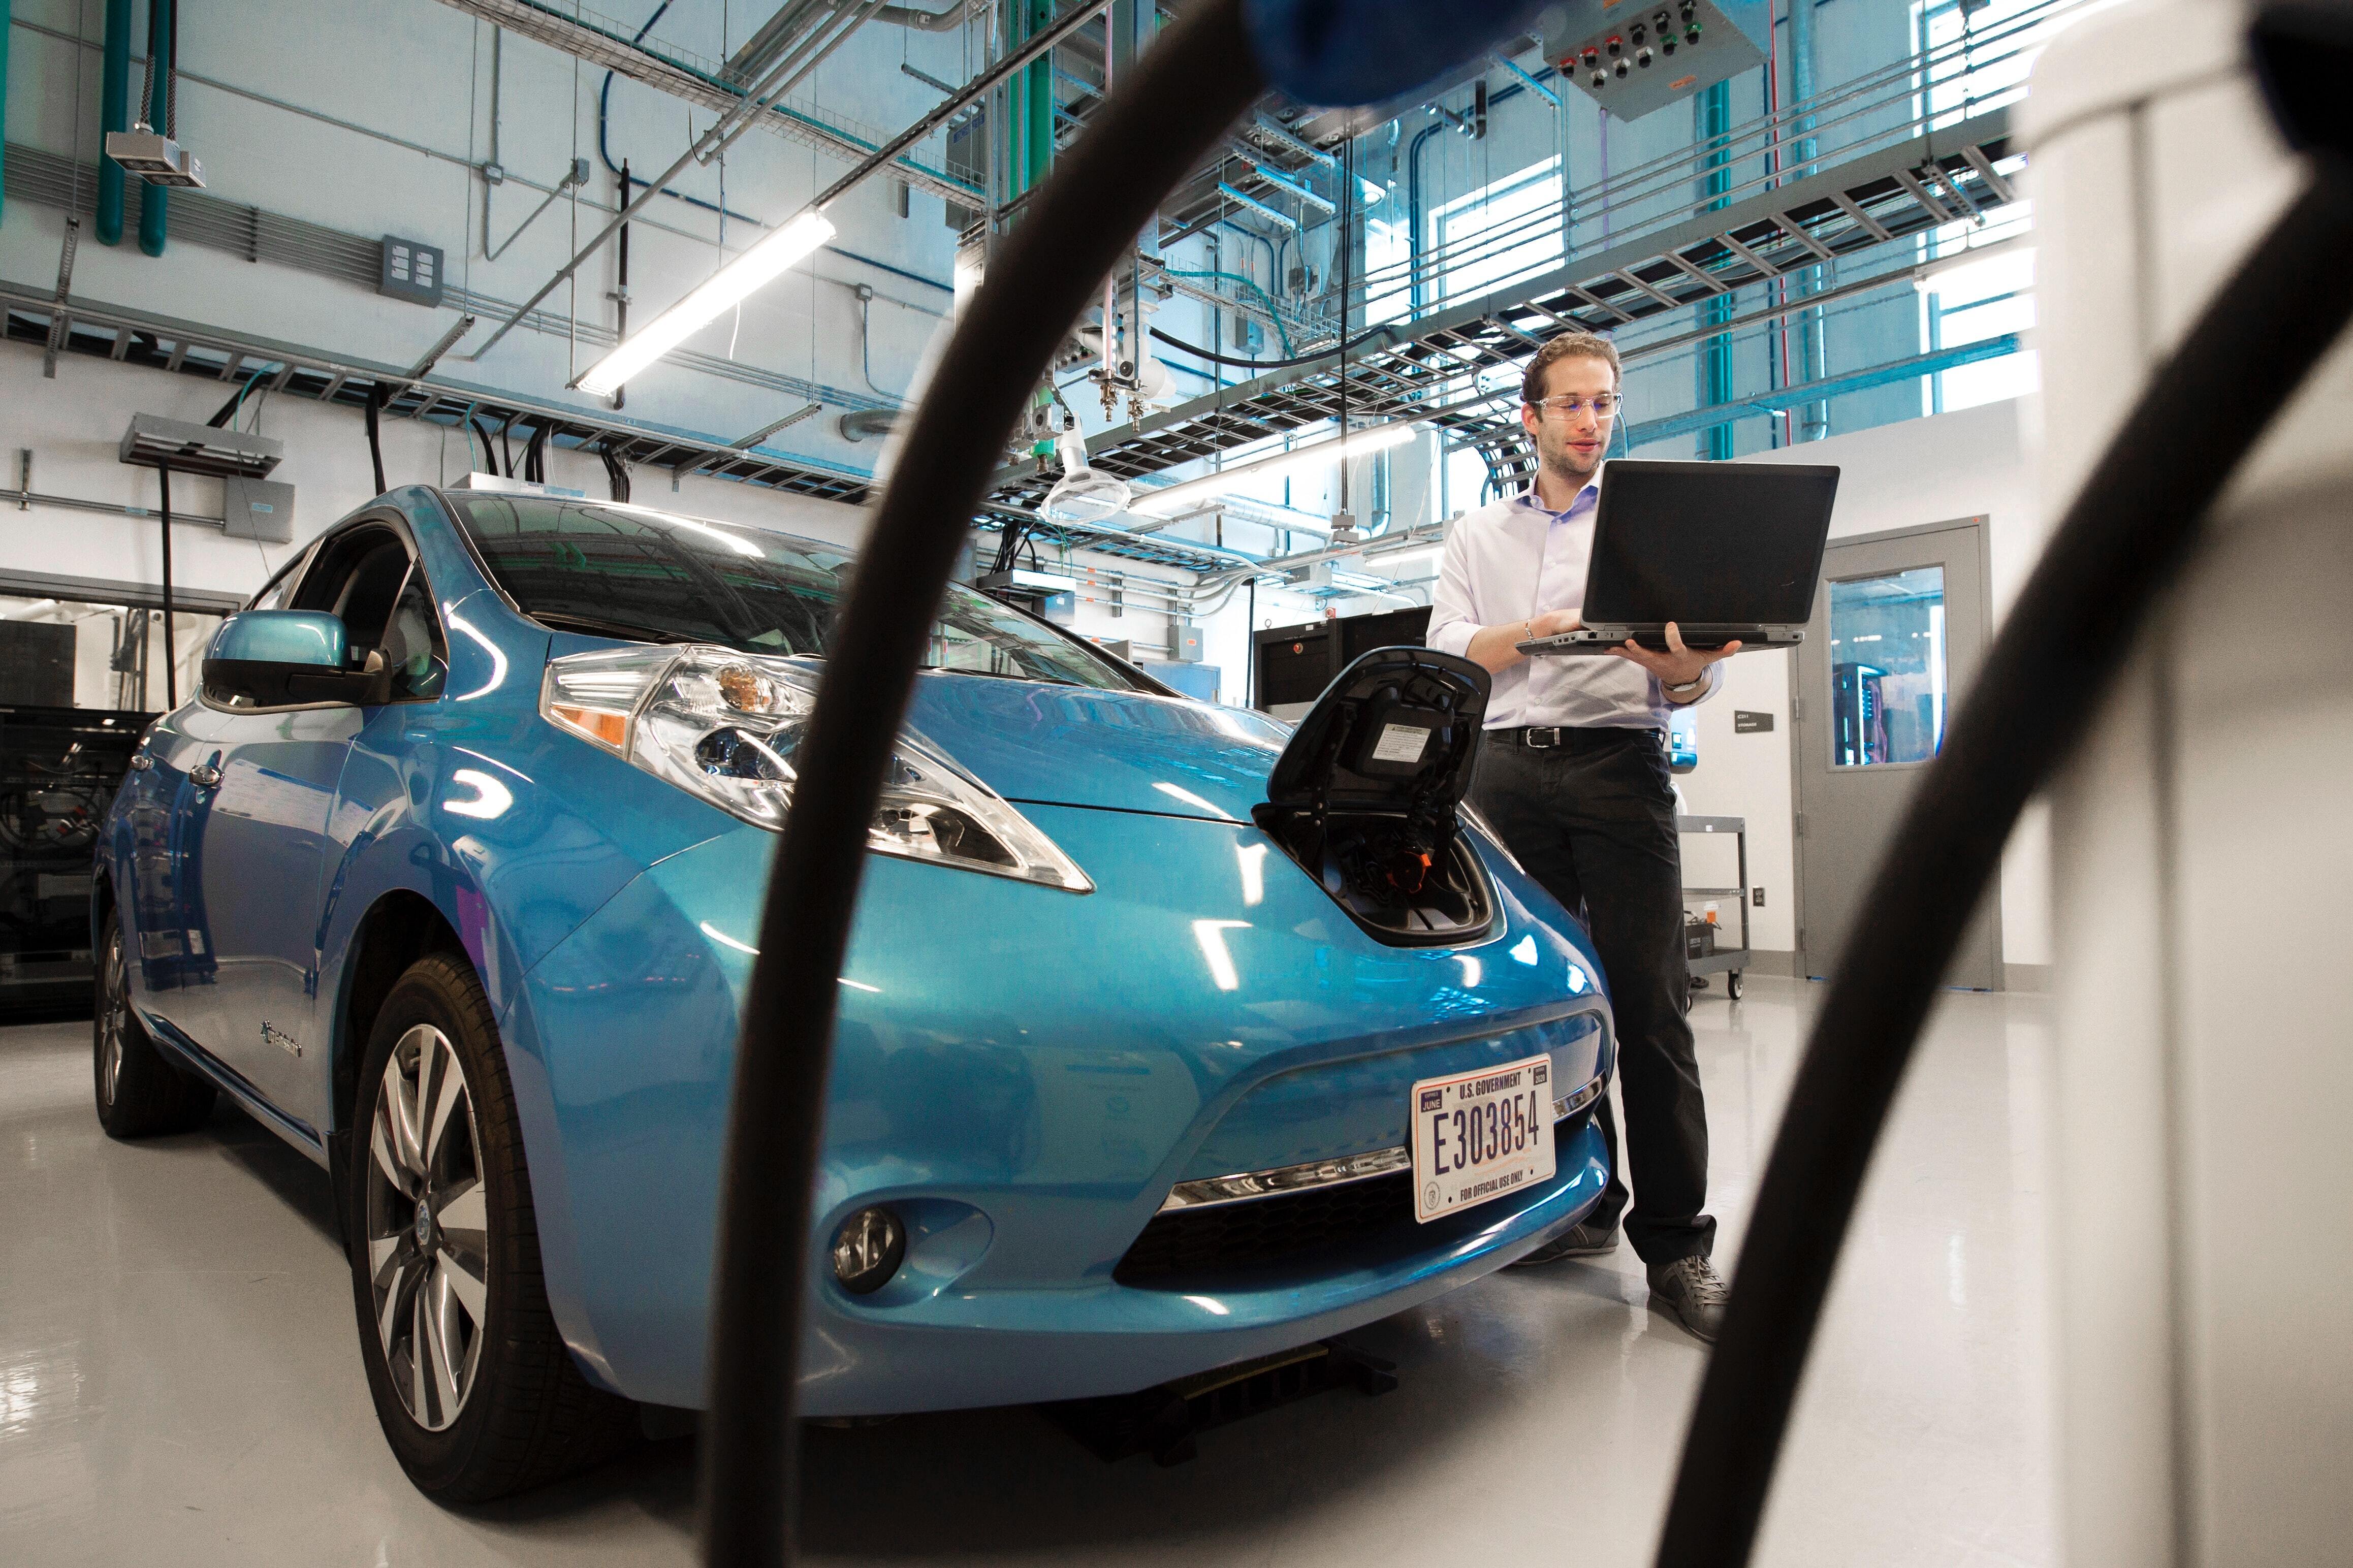 A man holding a laptop next to an EV, seemingly checking the status of the battery.